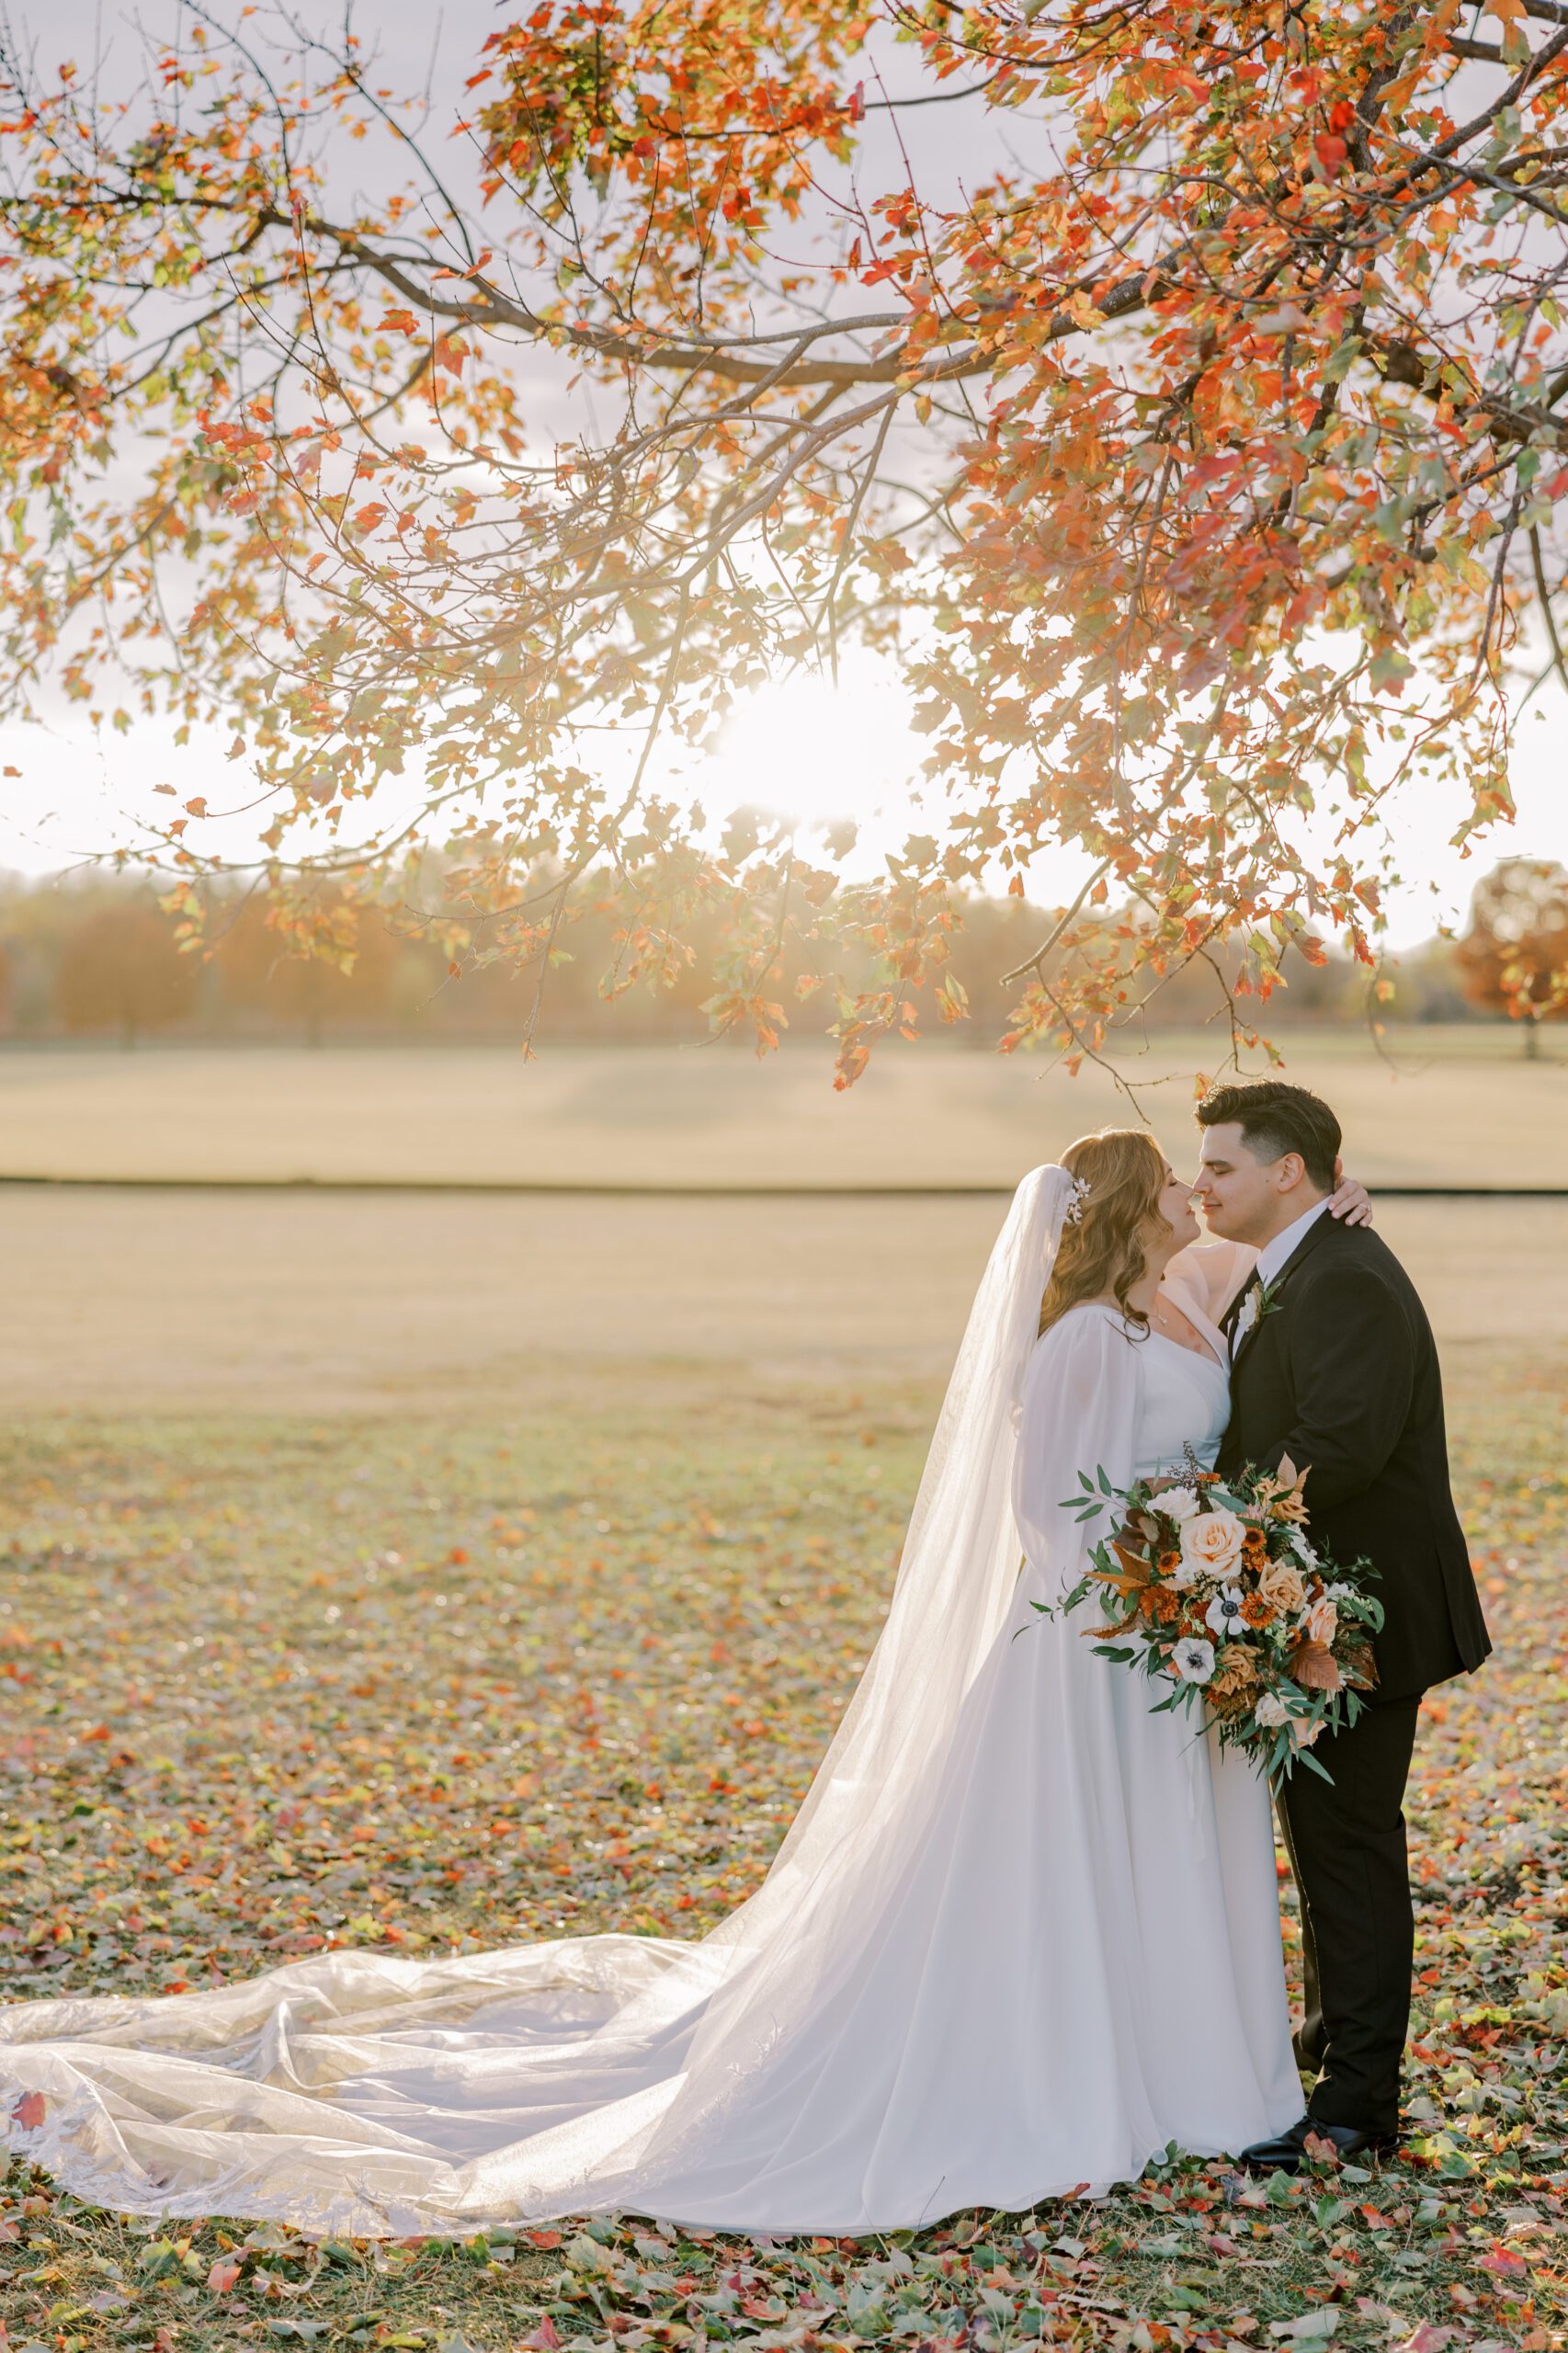 Beautiful full length sunset image of bride and groom touching noses while standing under a tree with orange leaves on it at king family vineyards